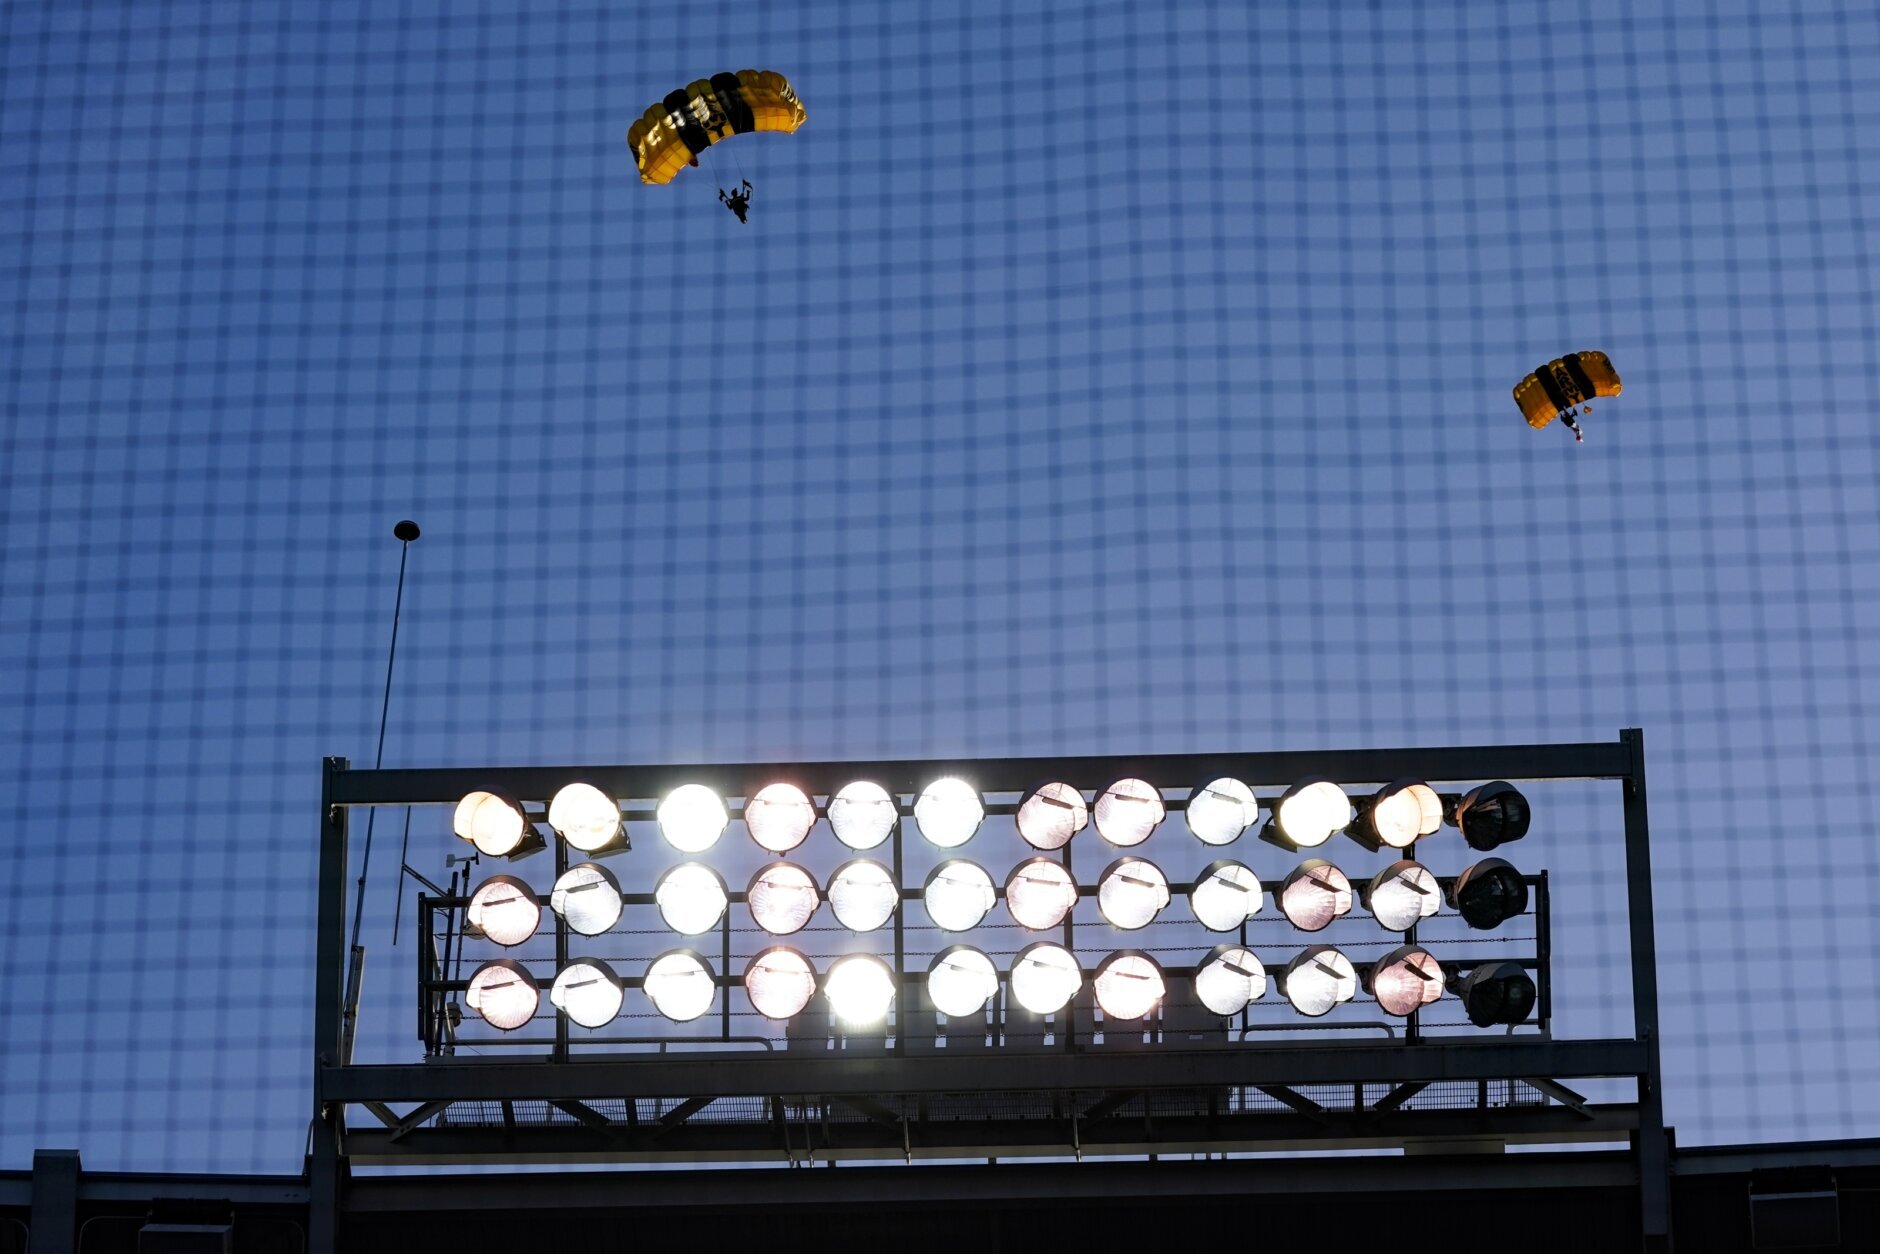 The U.S. Army Parachute Team the Golden Knights descend into National Park before a baseball game between the Washington Nationals and the Arizona Diamondbacks Wednesday, April 20, 2022, in Washington. The U.S. Capitol was briefly evacuated after police said they were tracking an aircraft “that poses a probable threat,” but the plane turned out to be the military aircraft with people parachuting out of it for a demonstration at the Nationals game, officials told The Associated Press. (AP Photo/Alex Brandon)